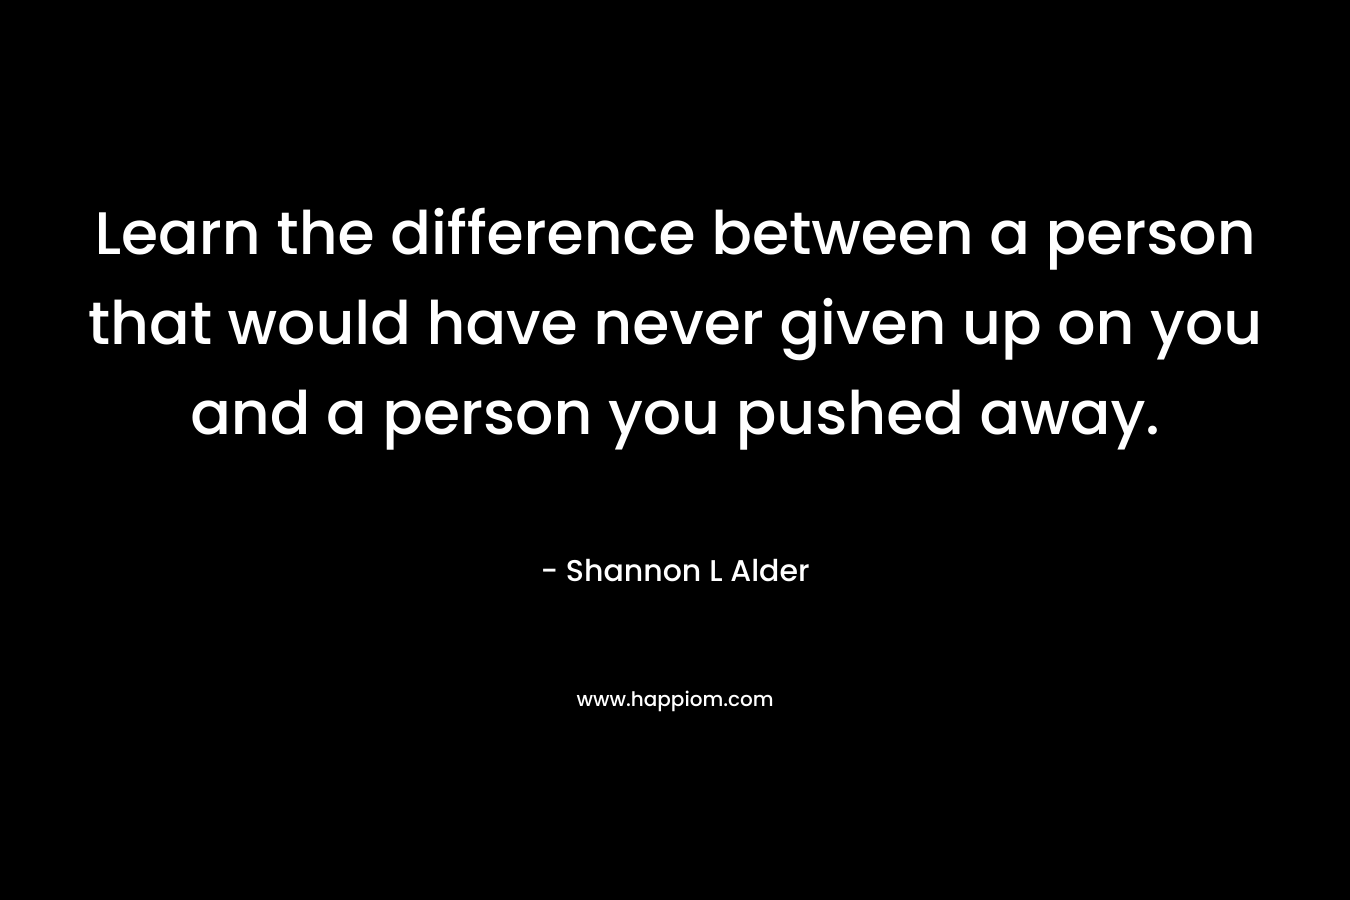 Learn the difference between a person that would have never given up on you and a person you pushed away. – Shannon L Alder